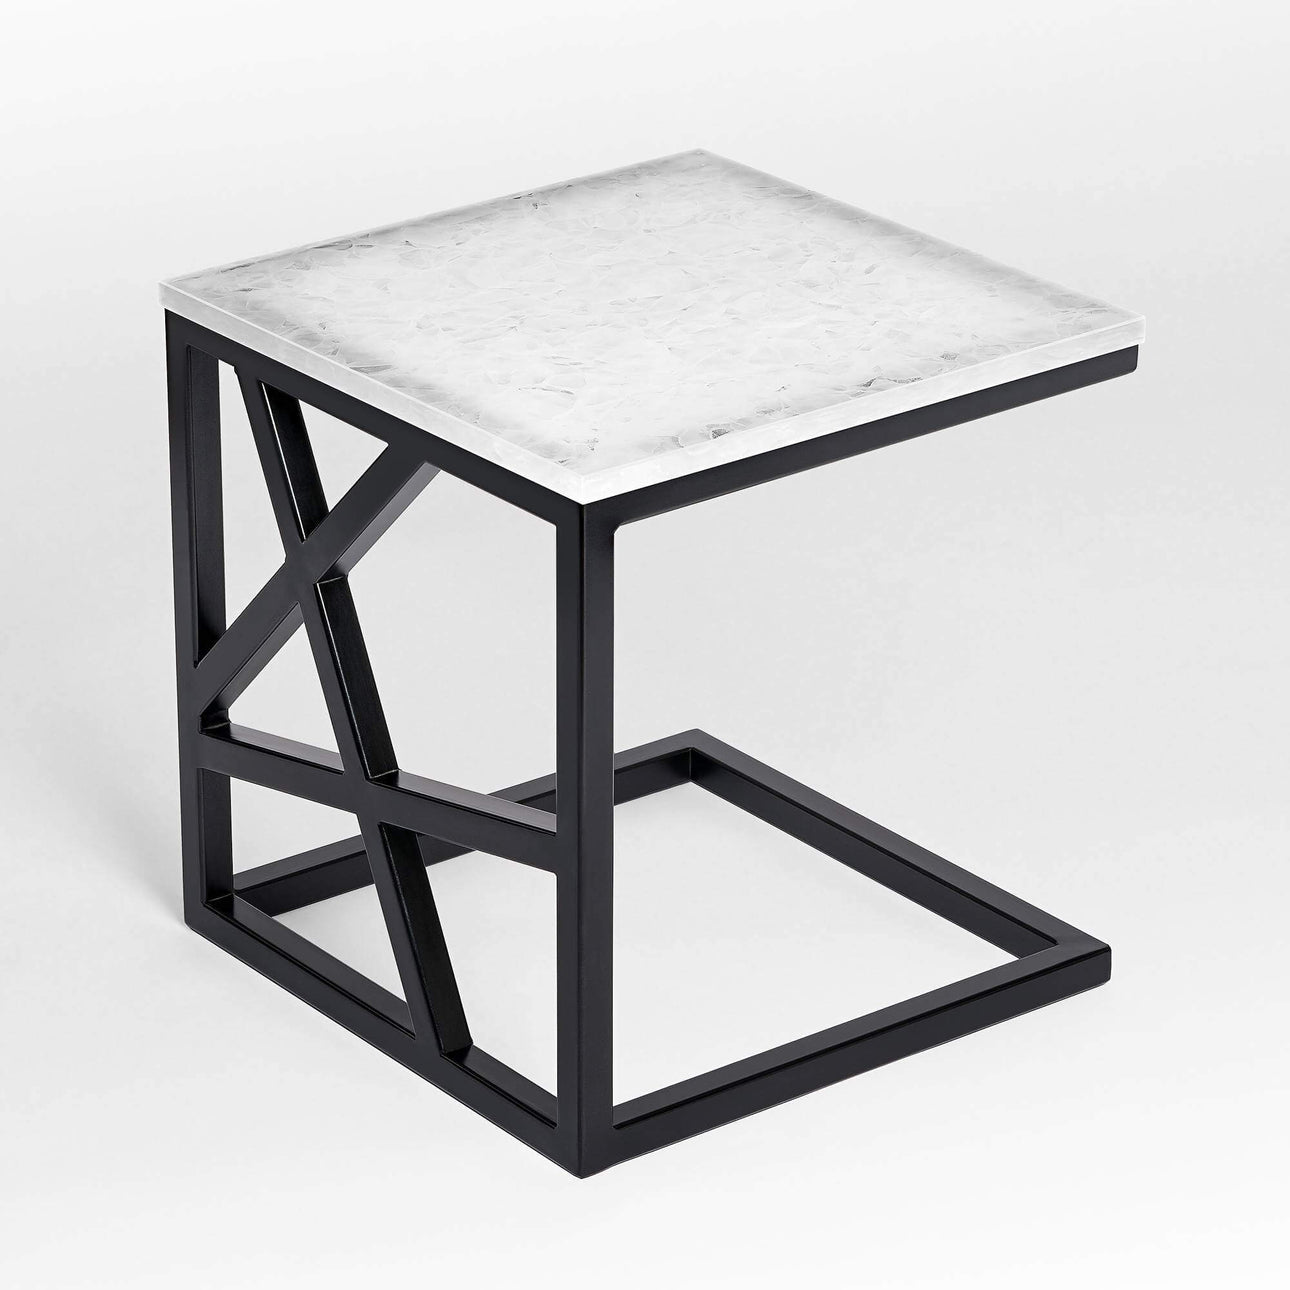 Pittsburgh glass ceramic side table